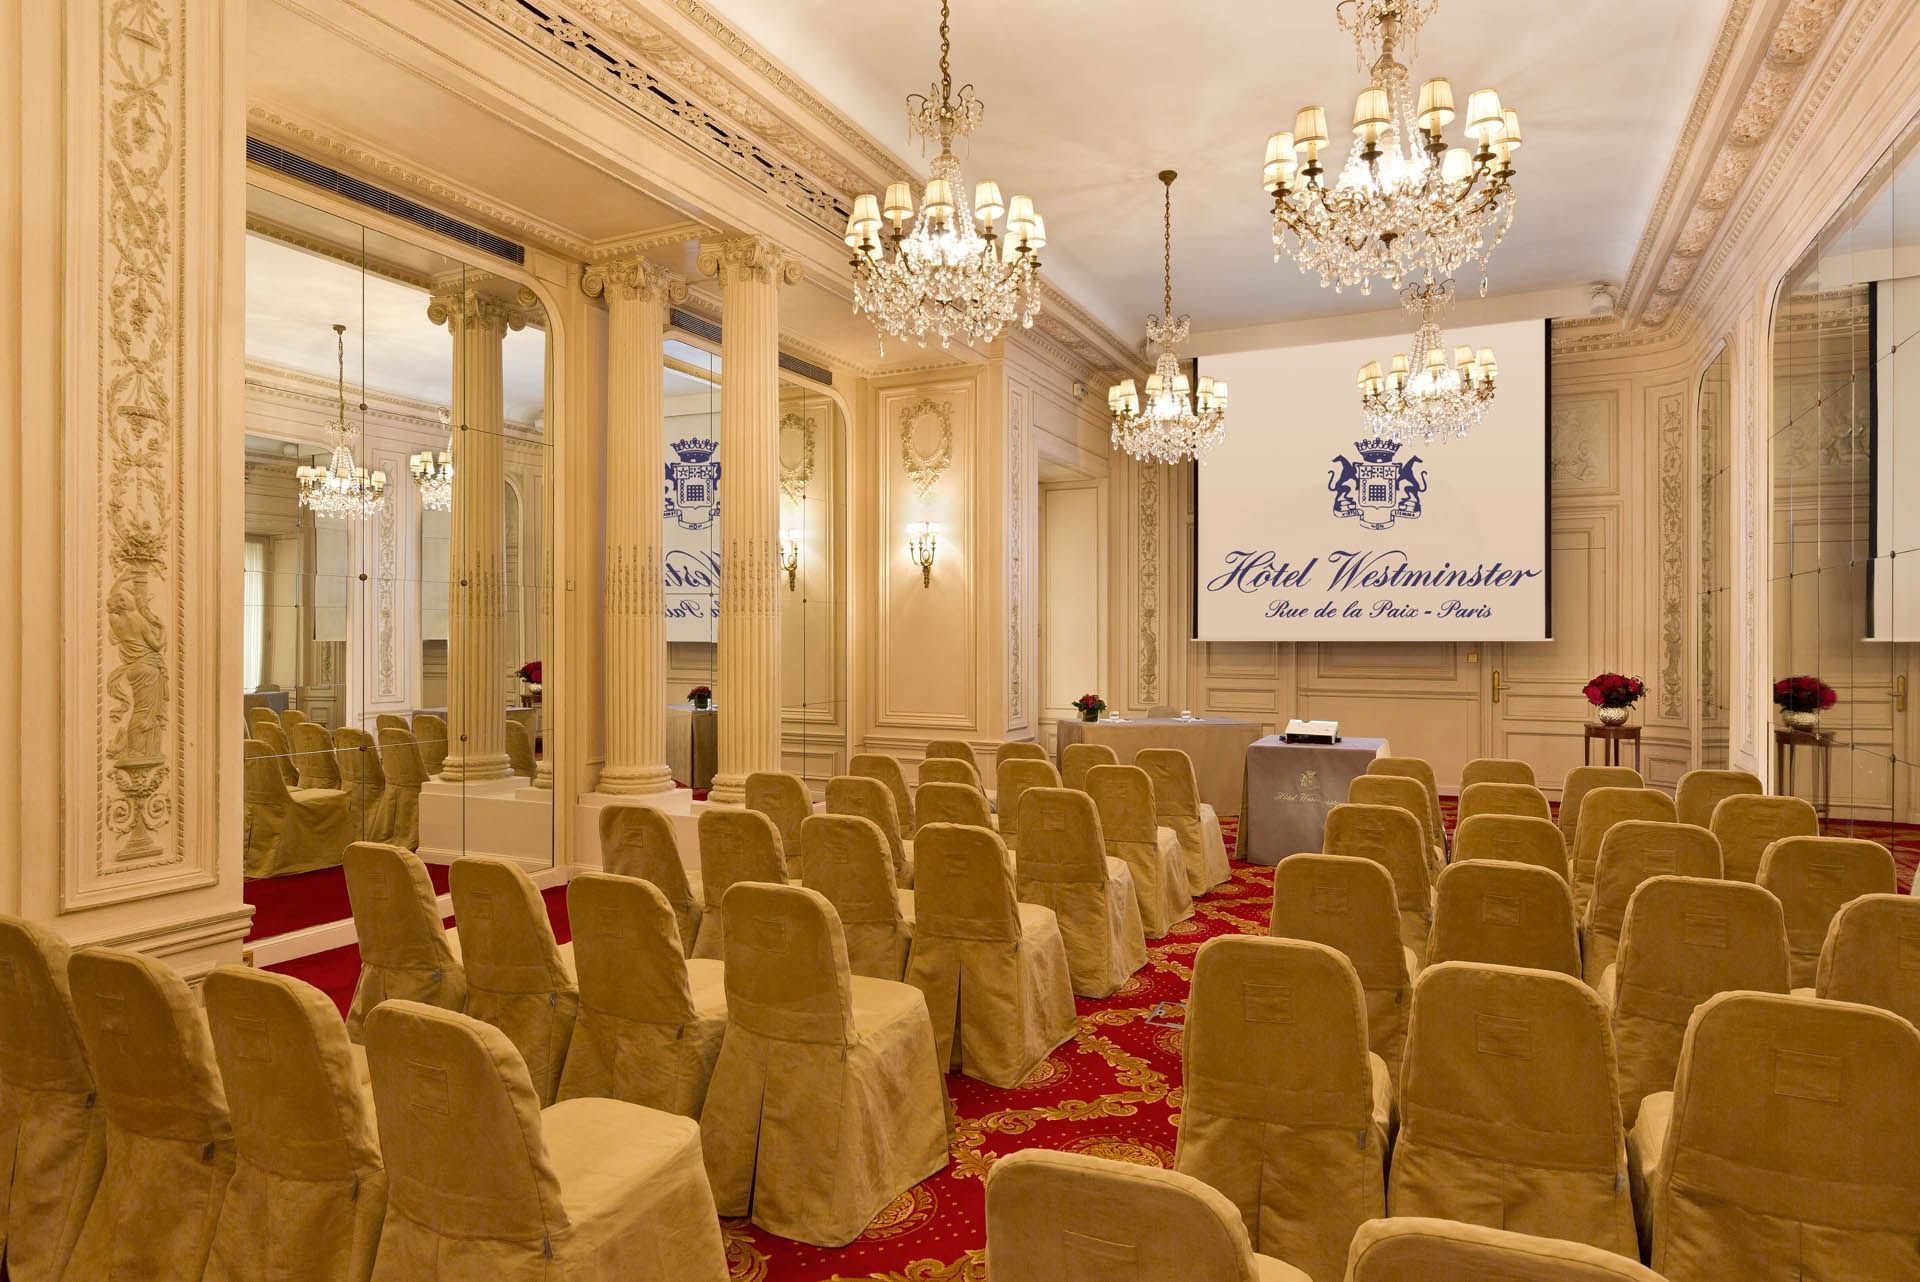 Meeting Room Récamier at Hotel Westminster Warwick Paris